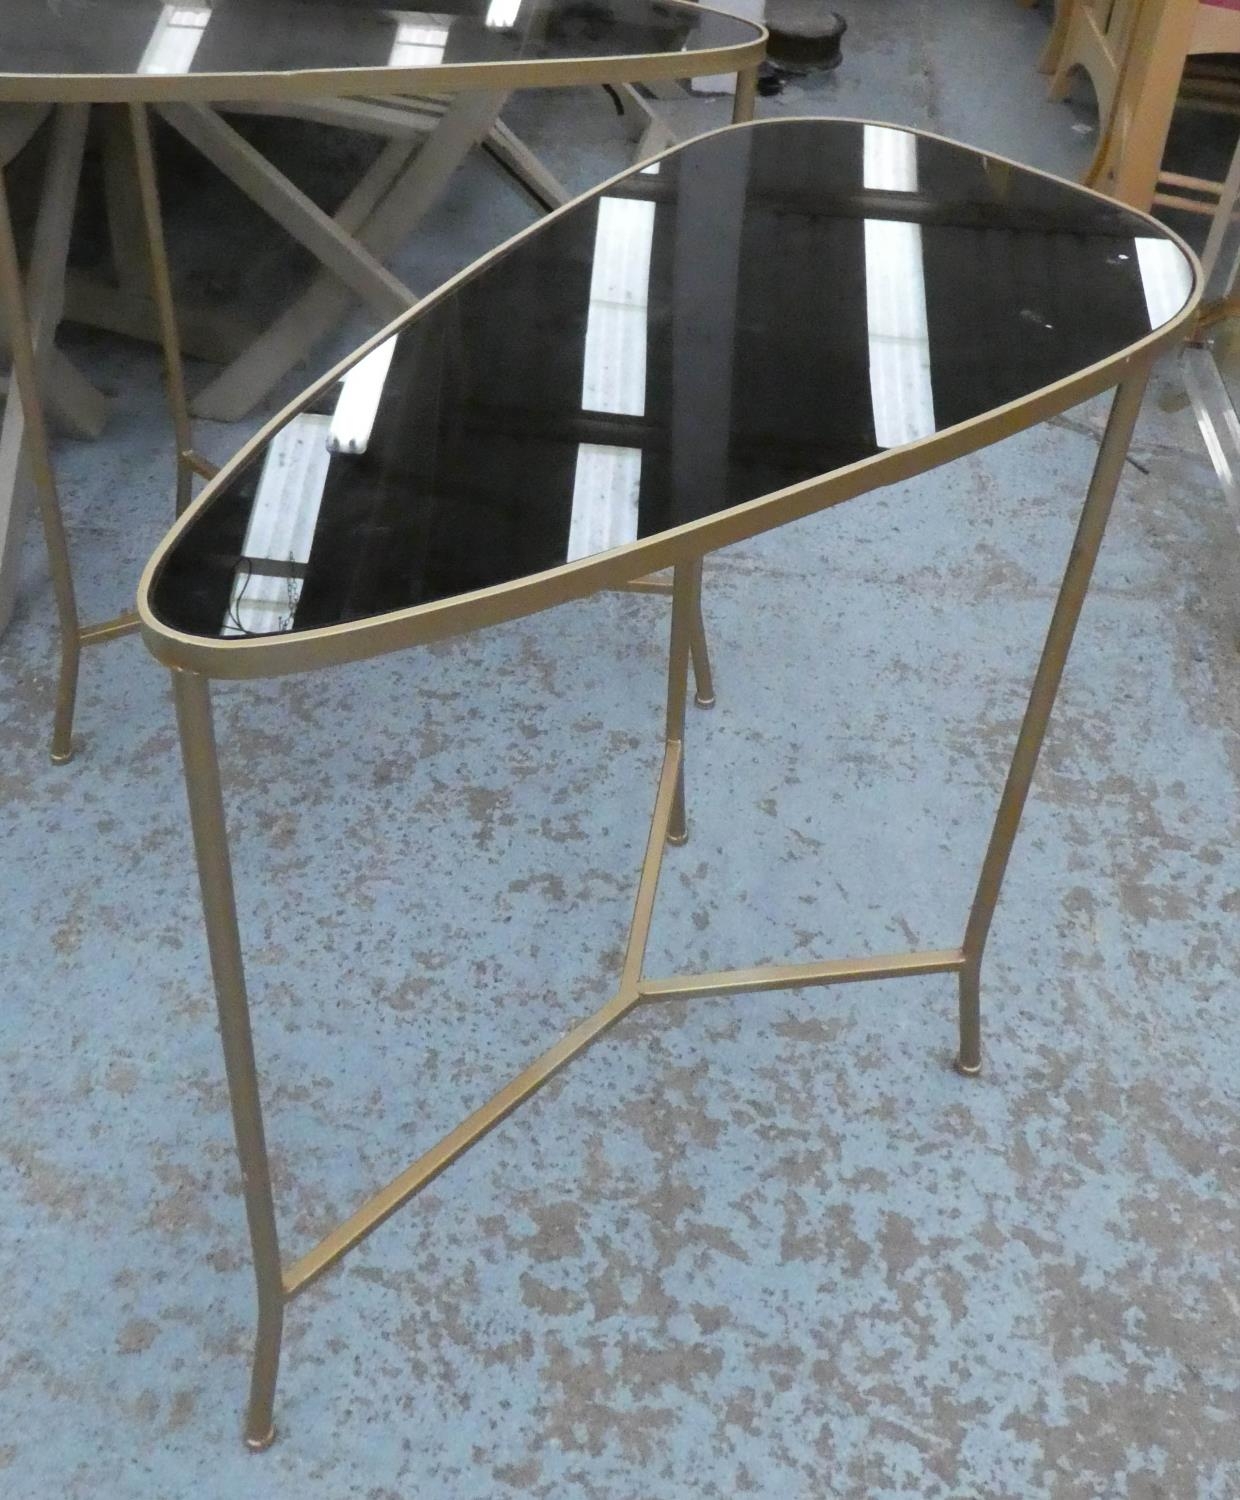 SIDE TABLES, a pair, 1950's Italian style, gilt metal, smoked glass tops, 70cm x 36cm x 71cm. (2) - Image 3 of 6